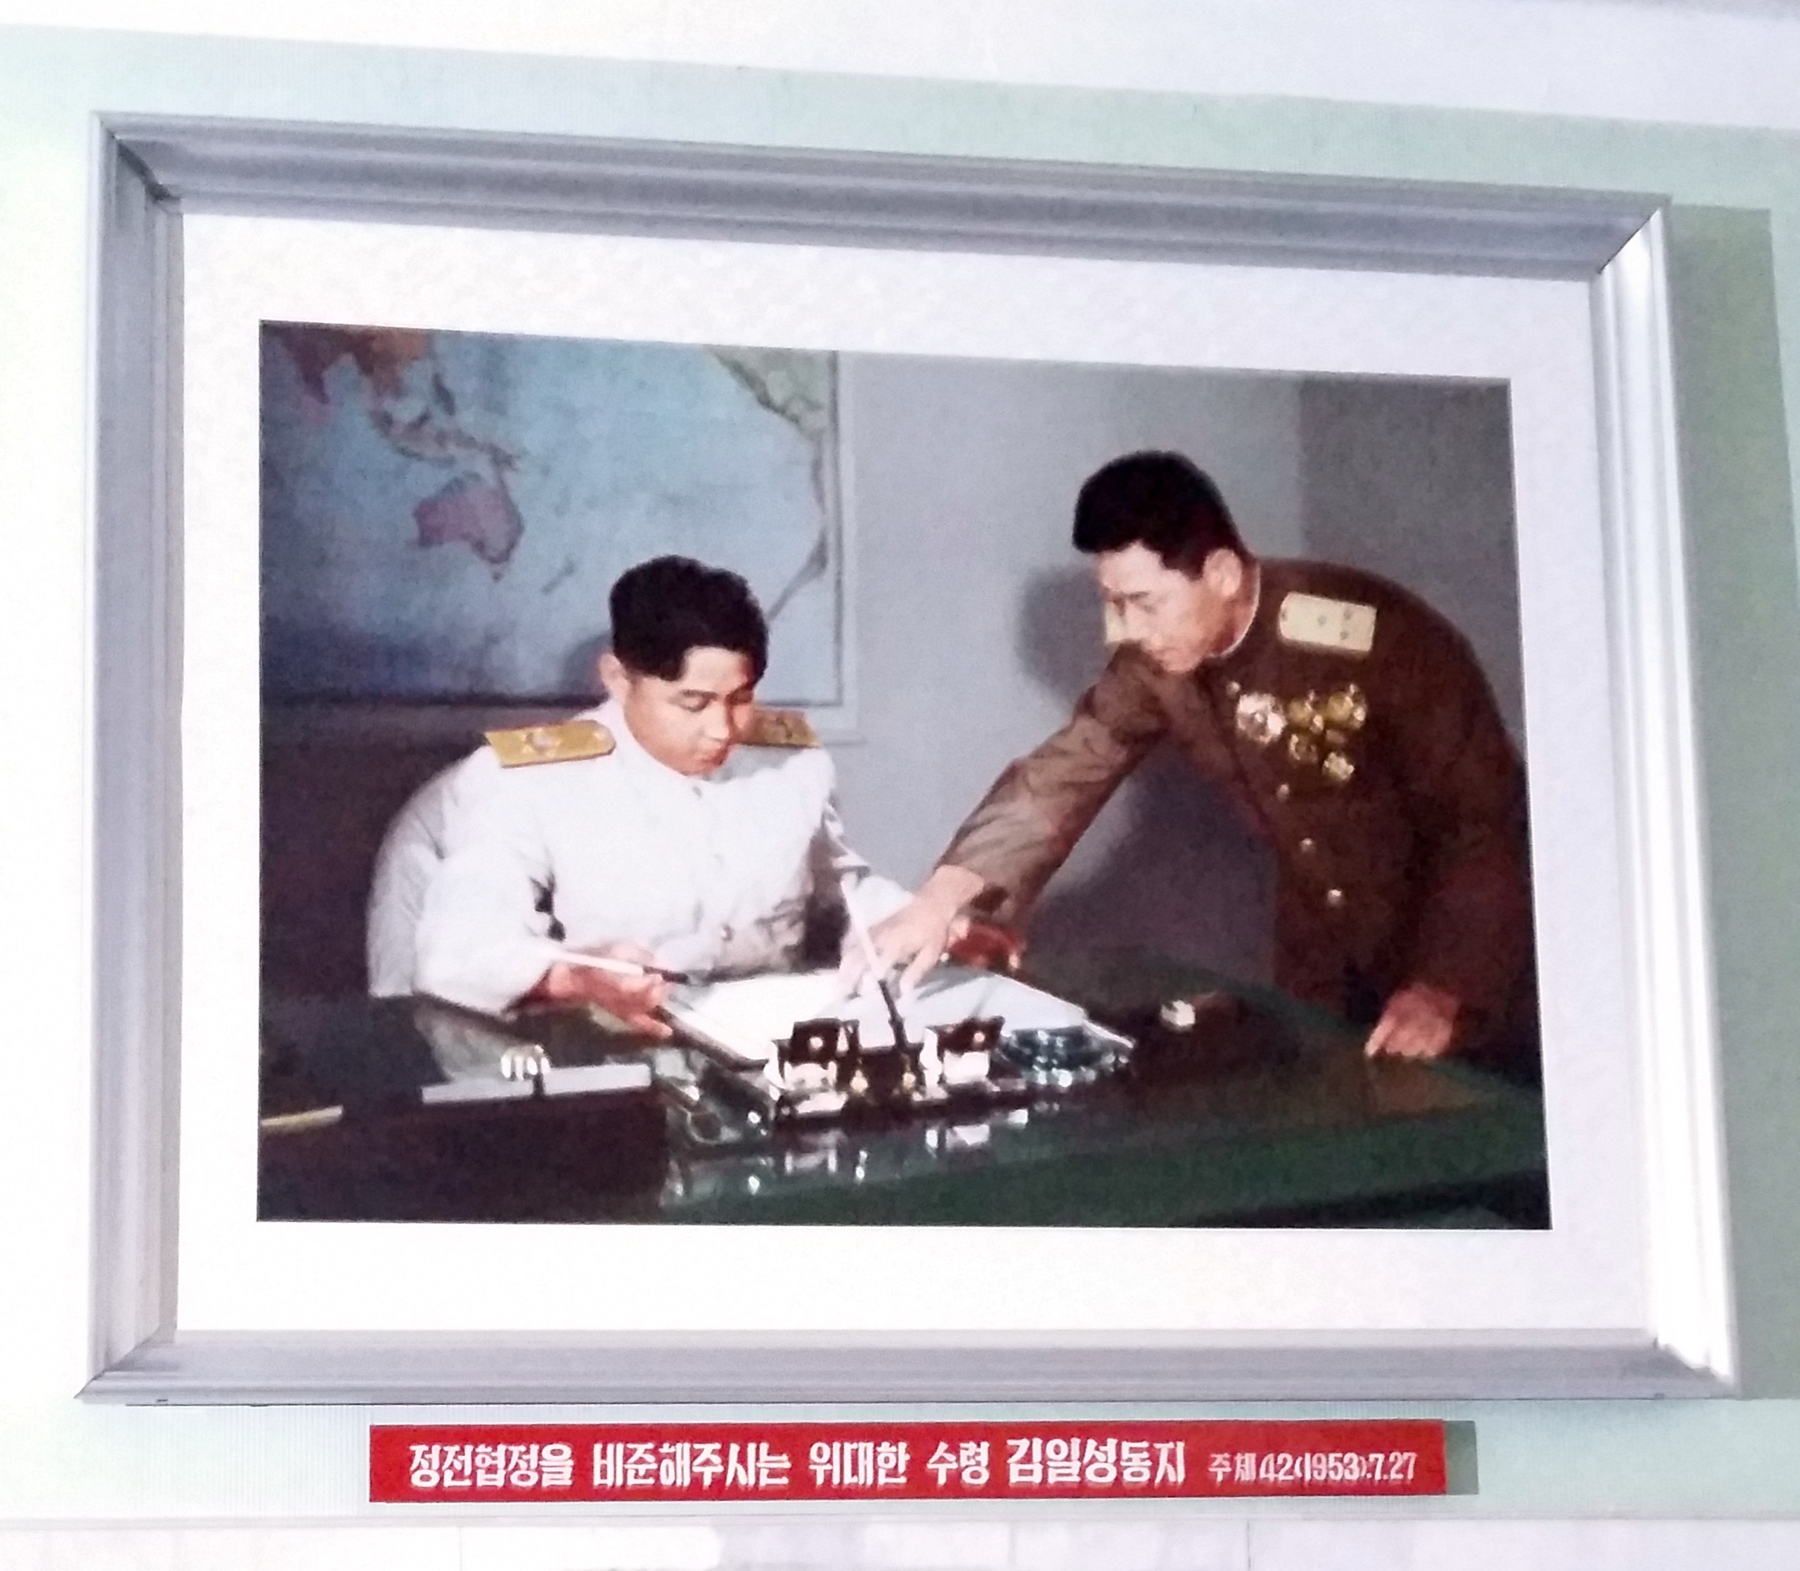 Il-sung or Jong-un? Only by reading the caption can we know for sure.